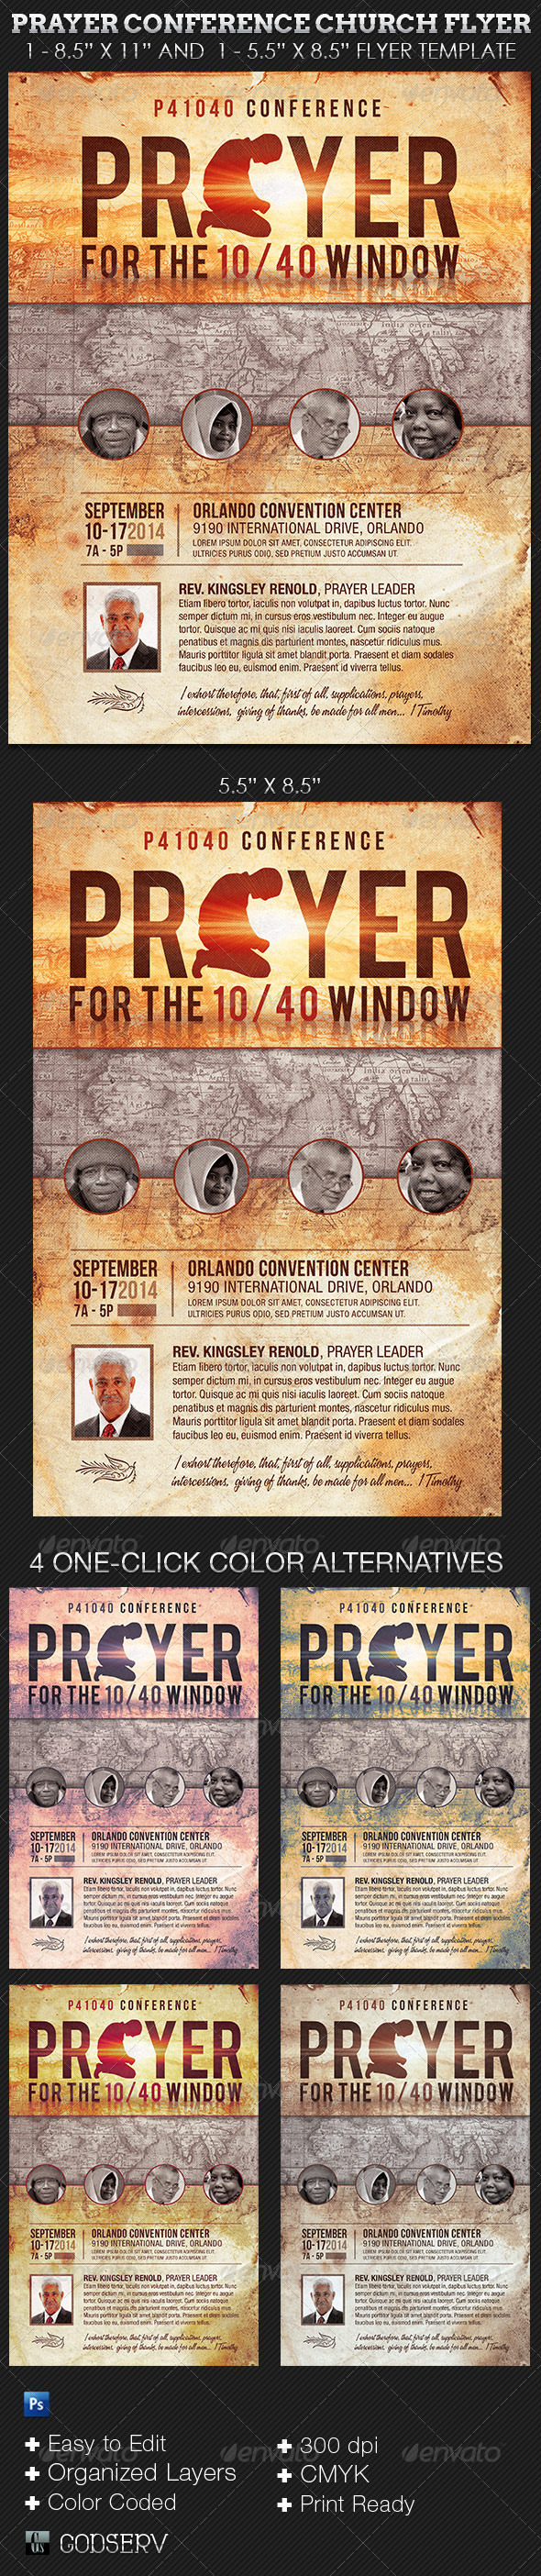 Prayer Conference Church Flyer Template